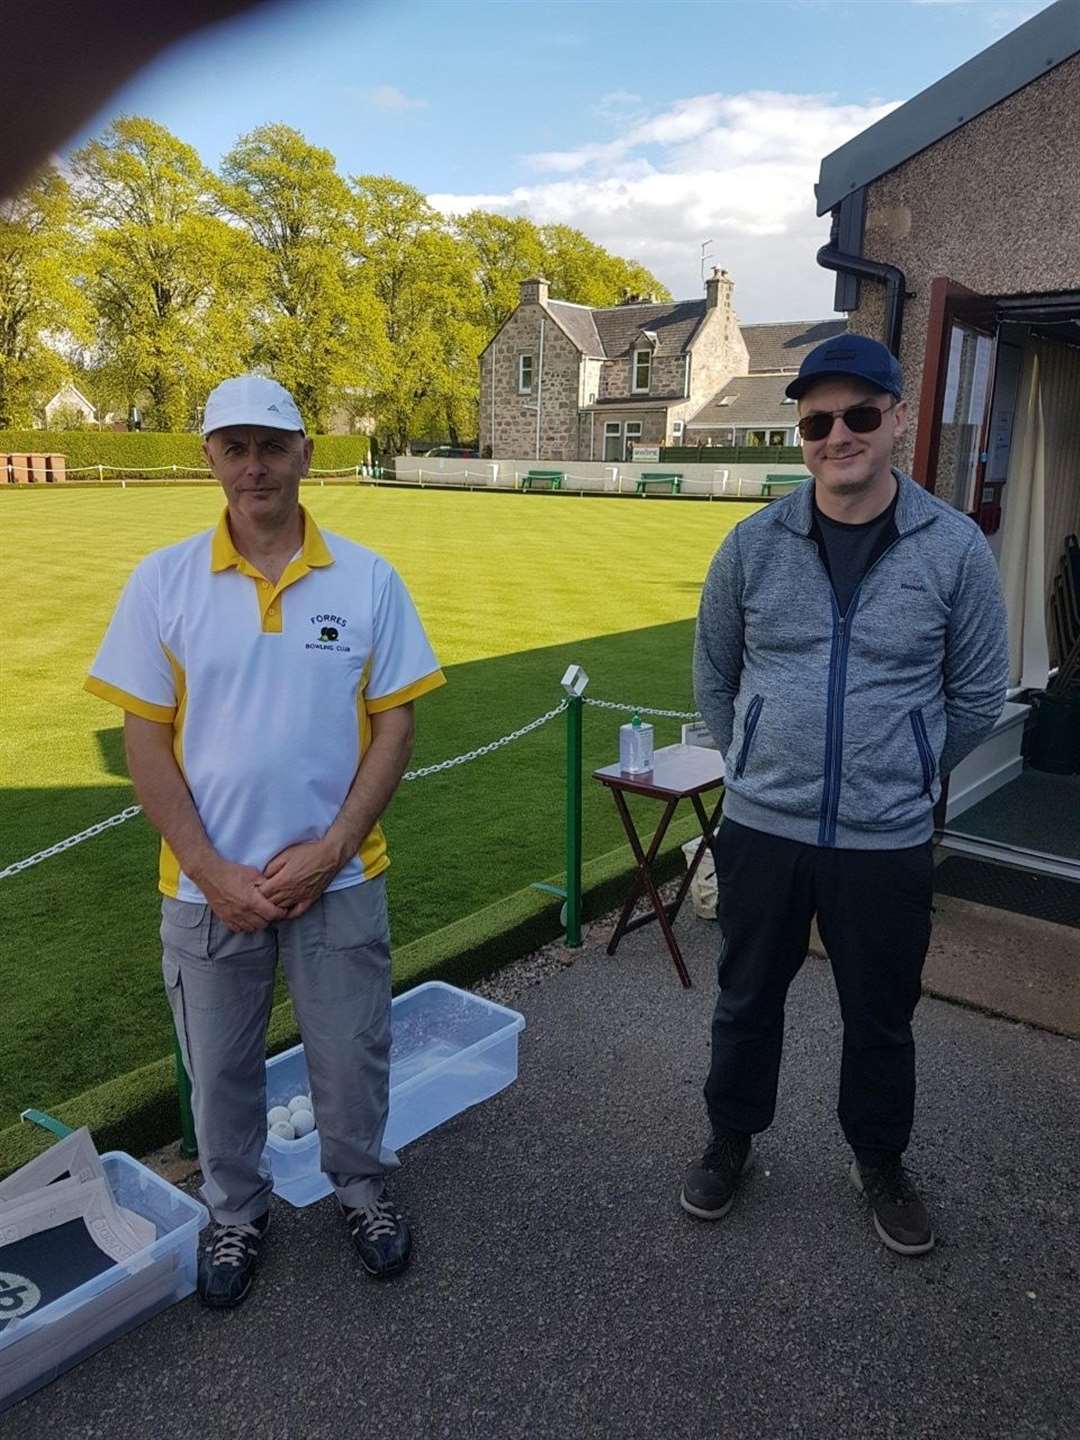 Paul Coutts and Alan Gardner were winners at Forres Bowling Club